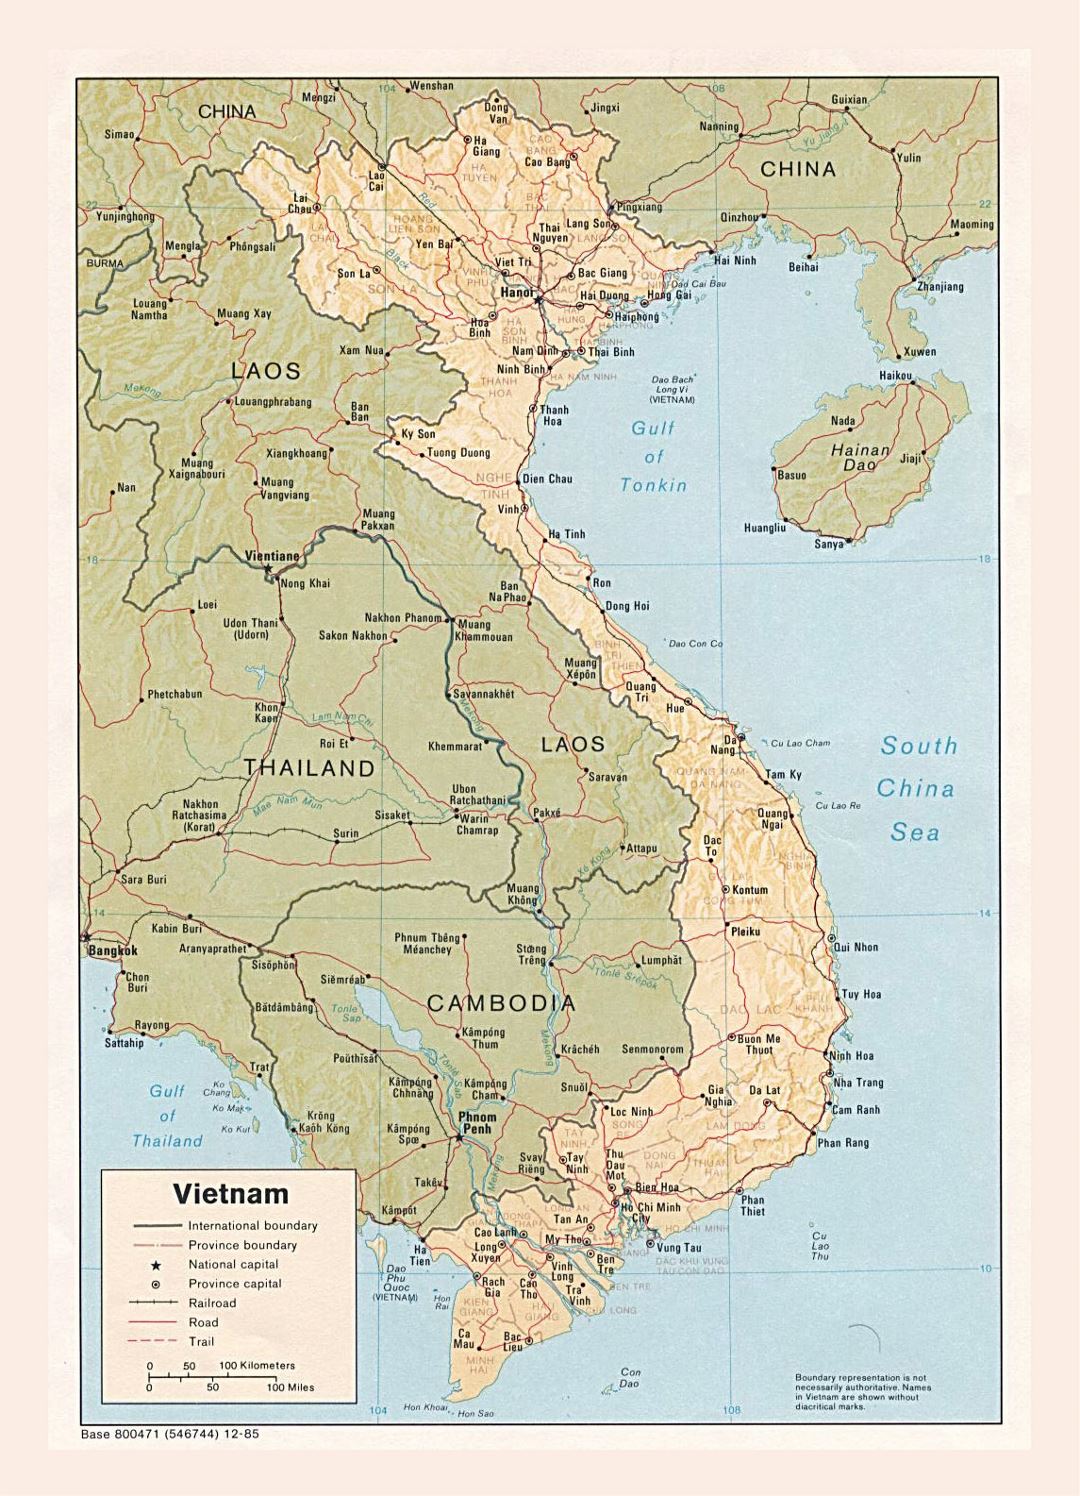 Detailed political and administrative map of Vietnam with relief, roads, railroads and major cities - 1985